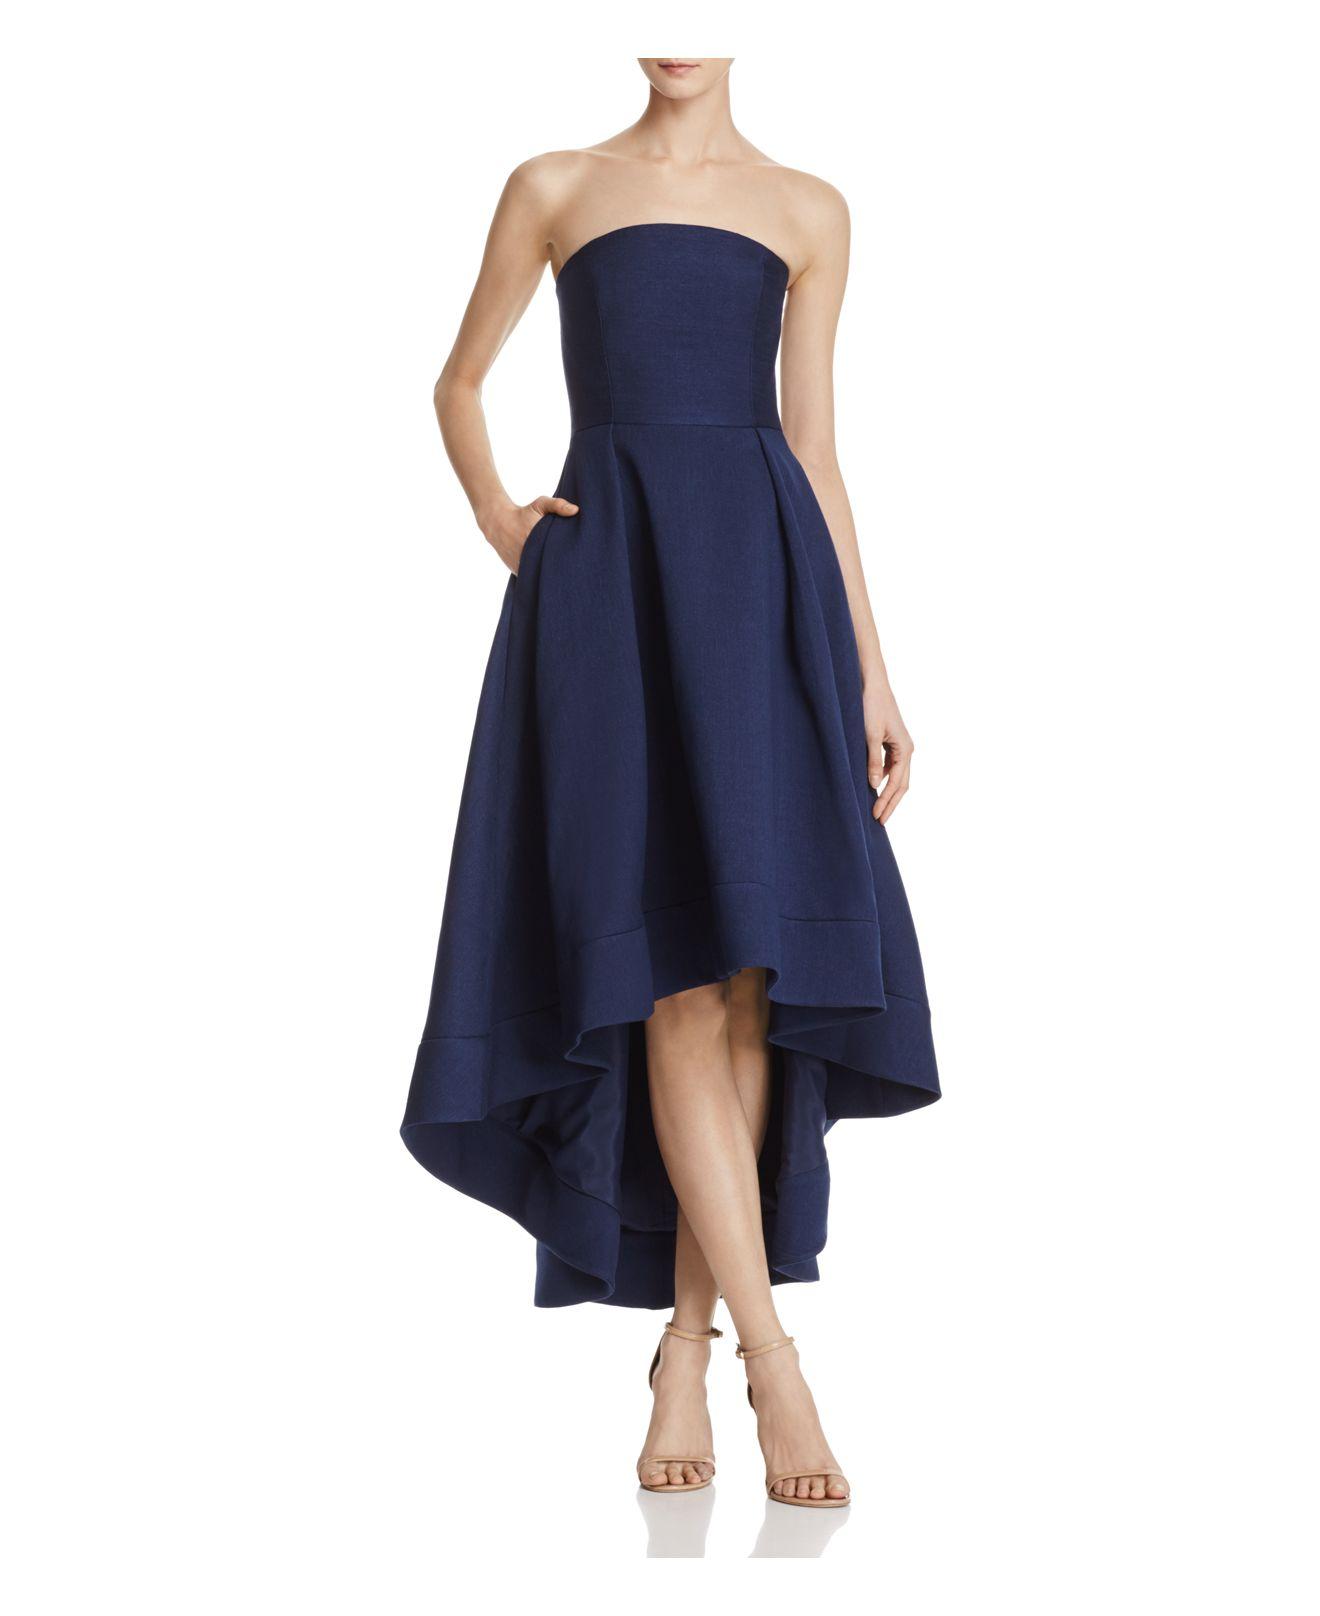 C/meo Collective Great Expectations Strapless Dress in Navy (Blue) - Lyst